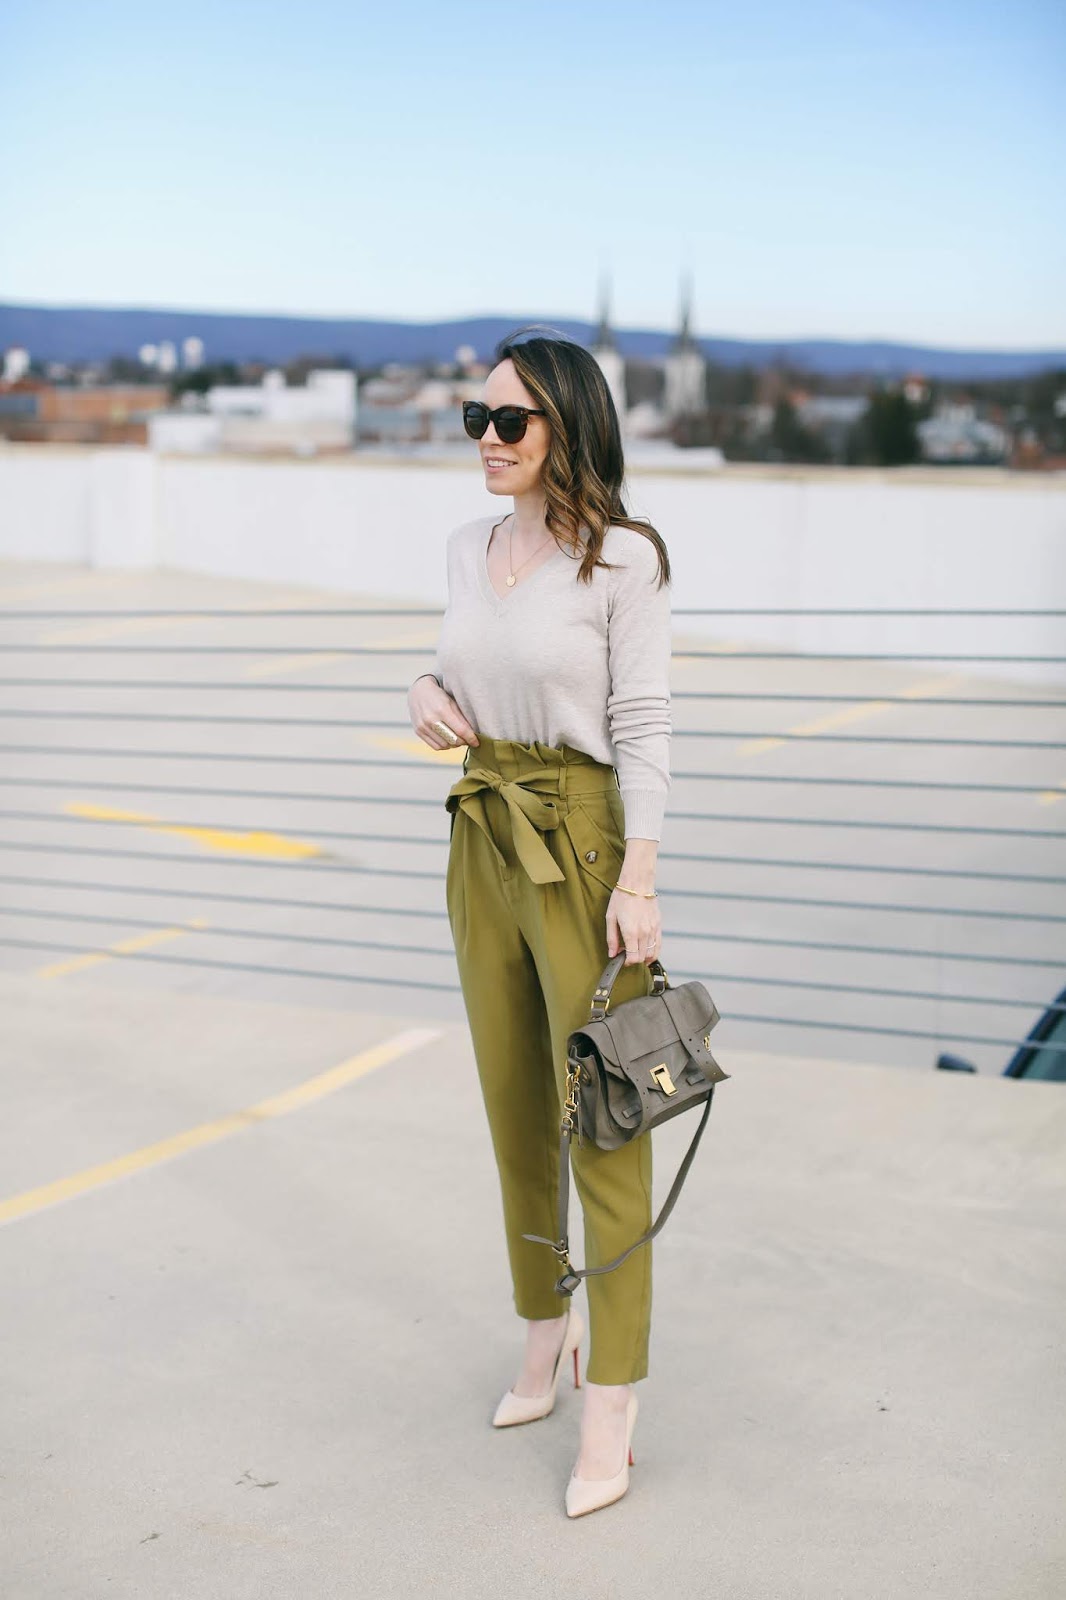 An Affordable Workwear Look For Spring + A Few Tips On Dressing Taller ...